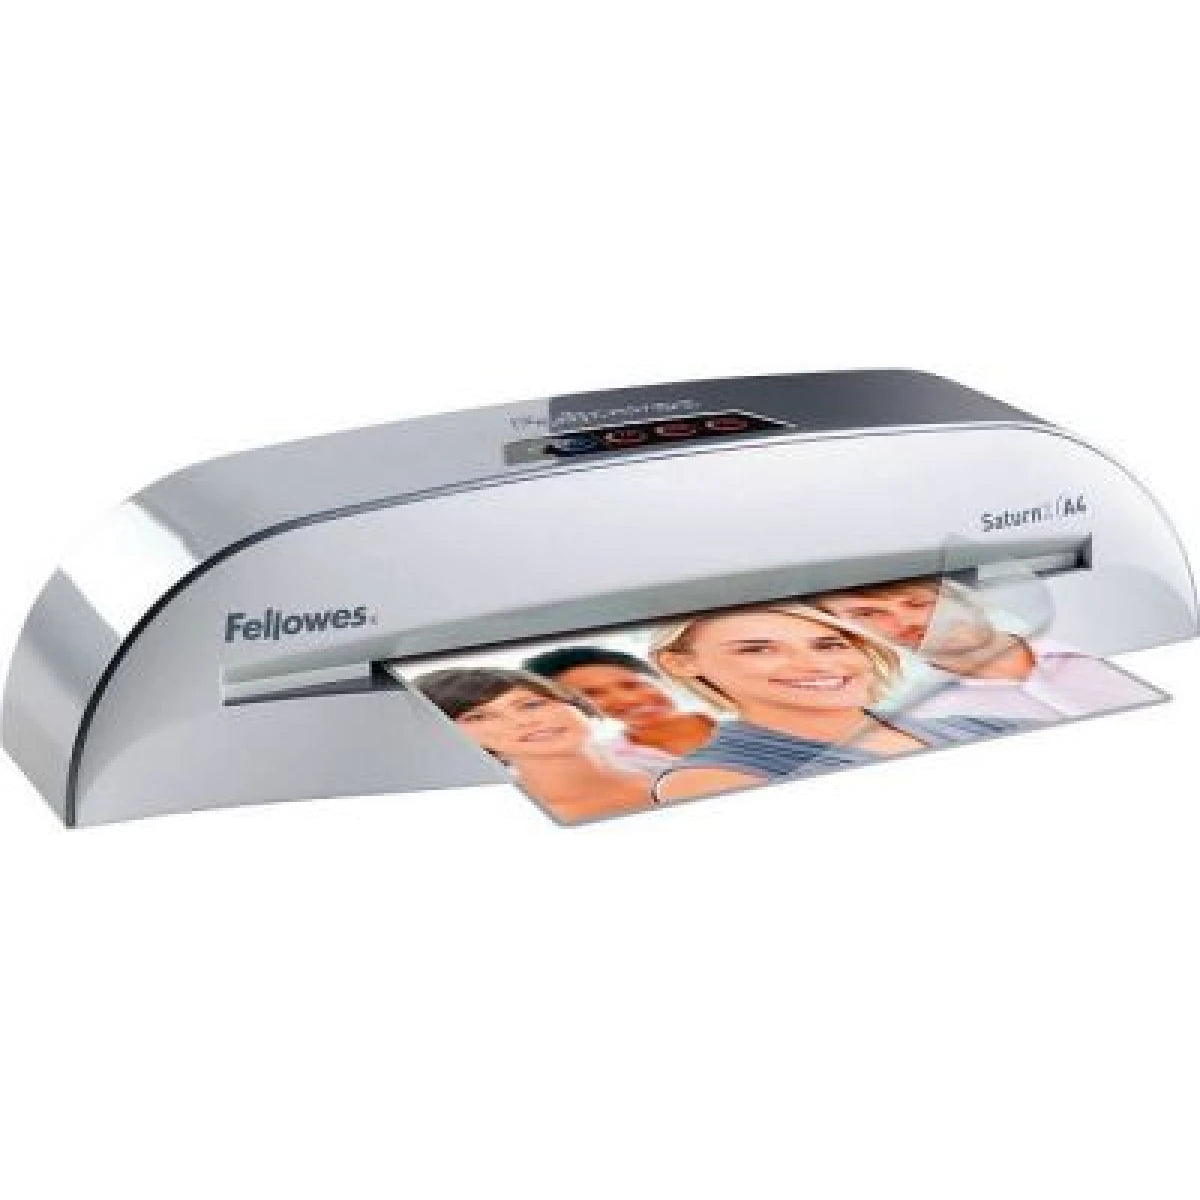 Fellowes Saturn 2 A4 Small Office Laminator with 100% Jam Free / Mechanism and HeatGuard